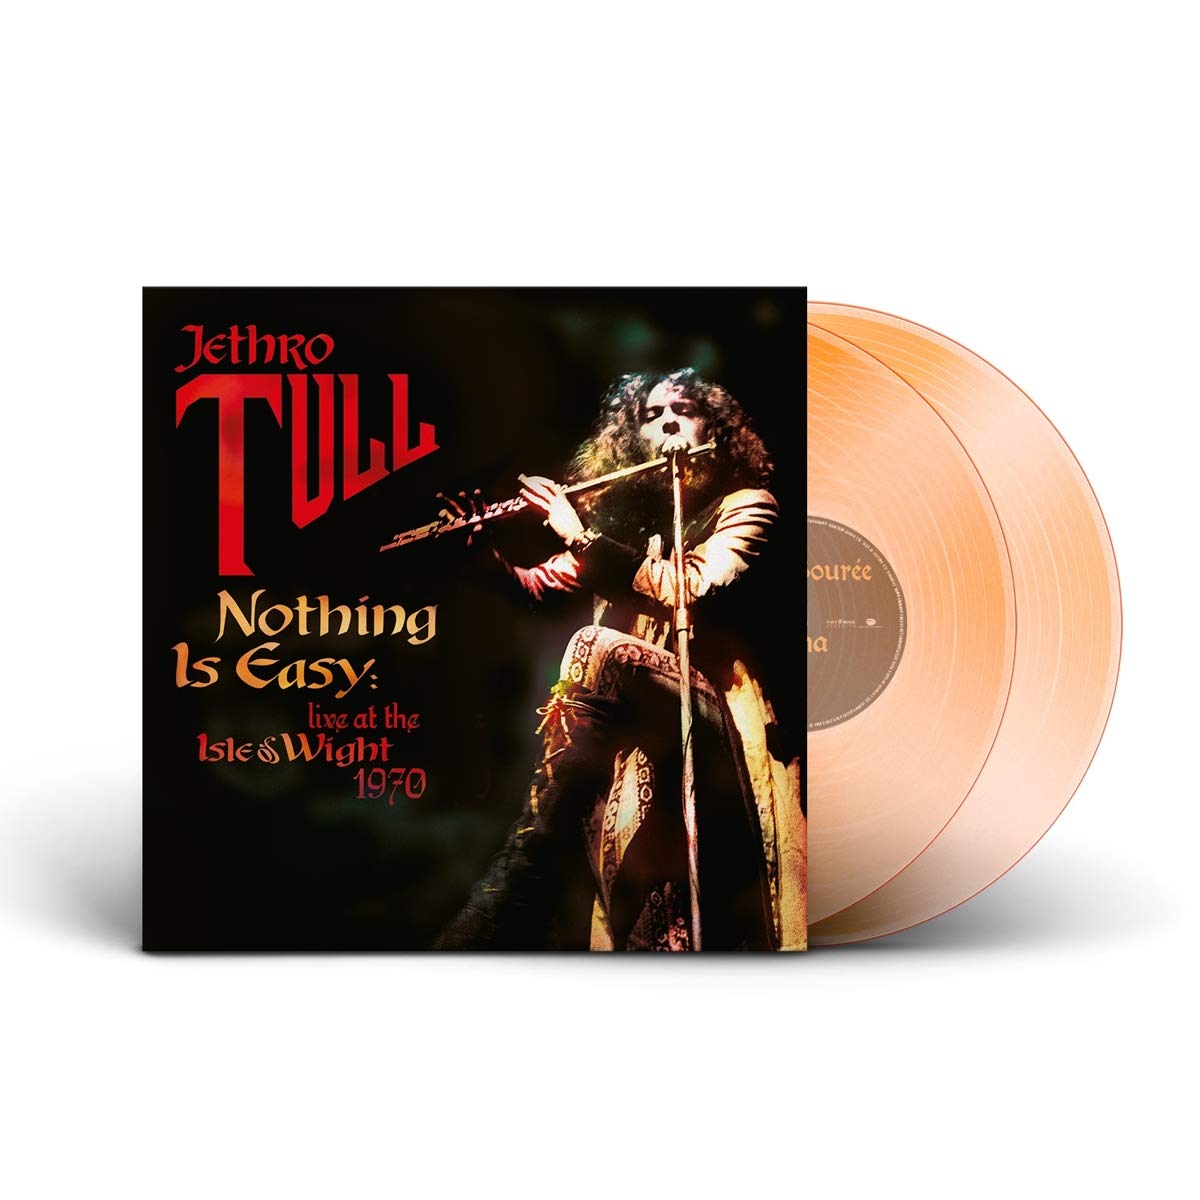 Jethro Tull Nothing Is Easy - Live At The Isle Of Wight 1970 Vinyl